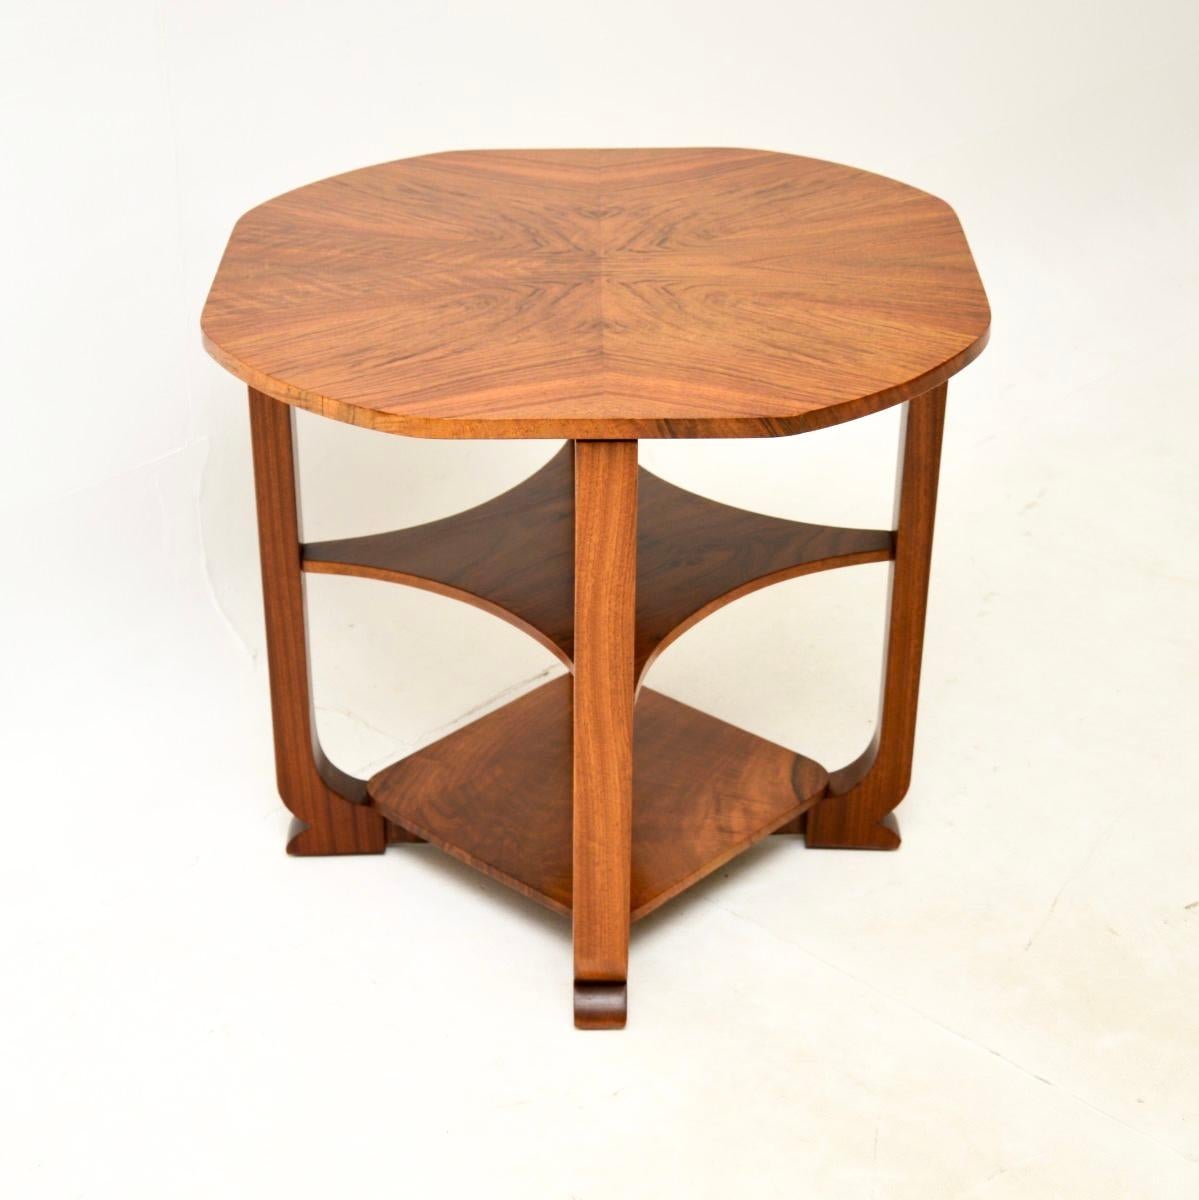 A stylish and extremely well made Art Deco figured walnut occasional side table. This was made in England, it dates from the 1920-30’s.

The quality is superb, this has a beautifully shaped top and an additional two useful lower tiers. The top has a